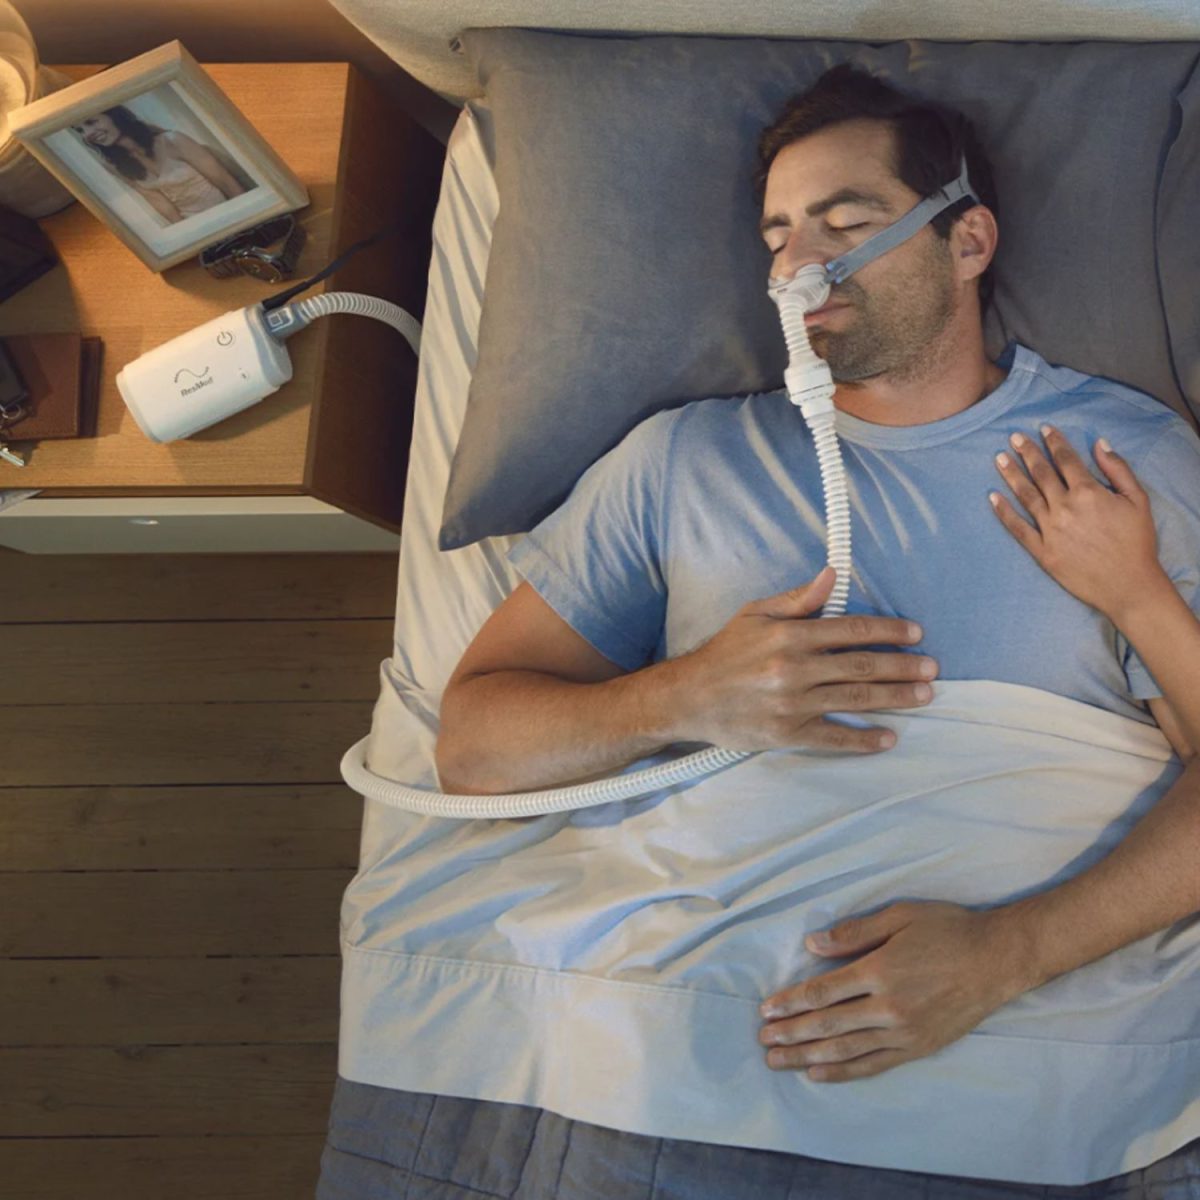 ResMed AirMini CPAP Machine being used in bed | Intus Healthcare